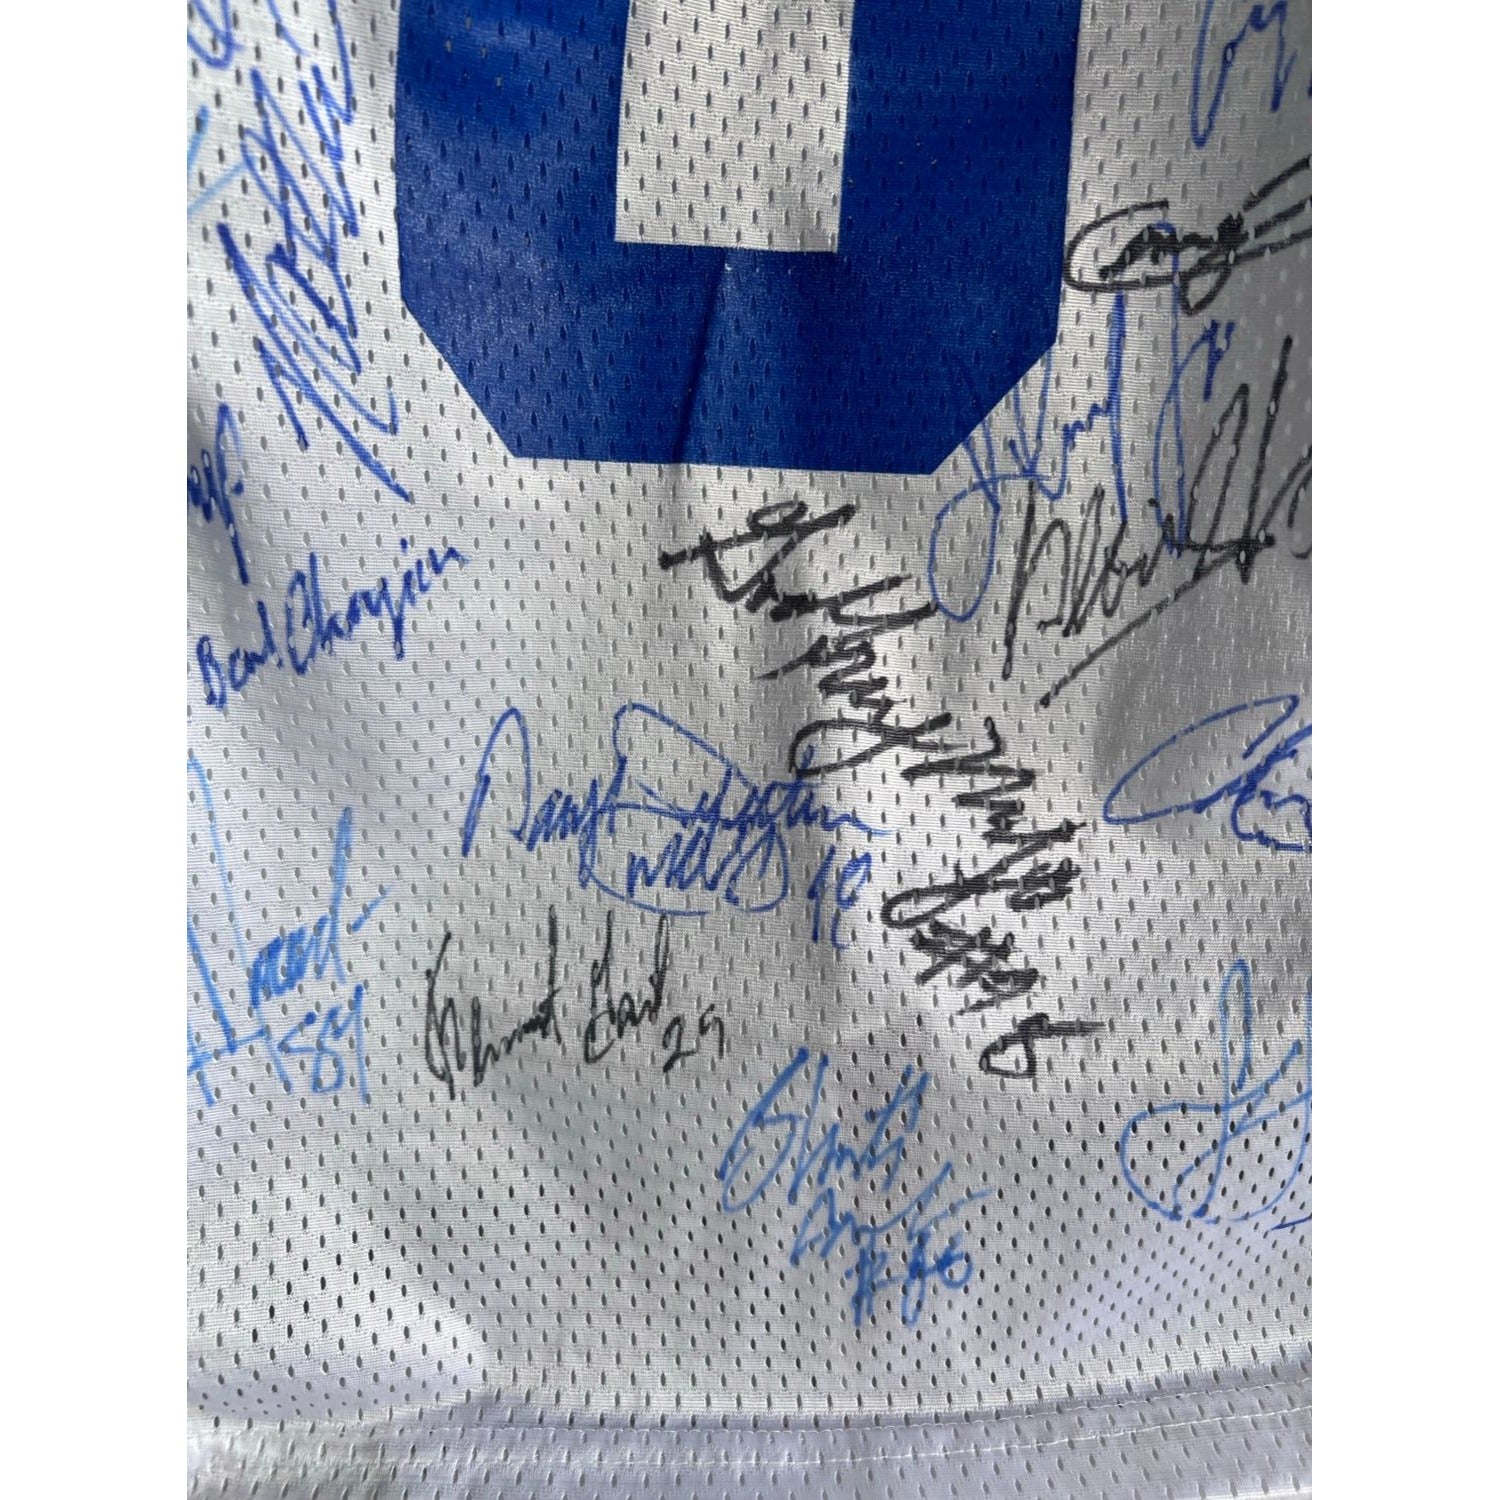 Dallas Cowboys Emmitt Smith Troy Aikman Michael Irvin Jerry Jones Barry Switzer Super Bowl championship team signed jersey signed with proof